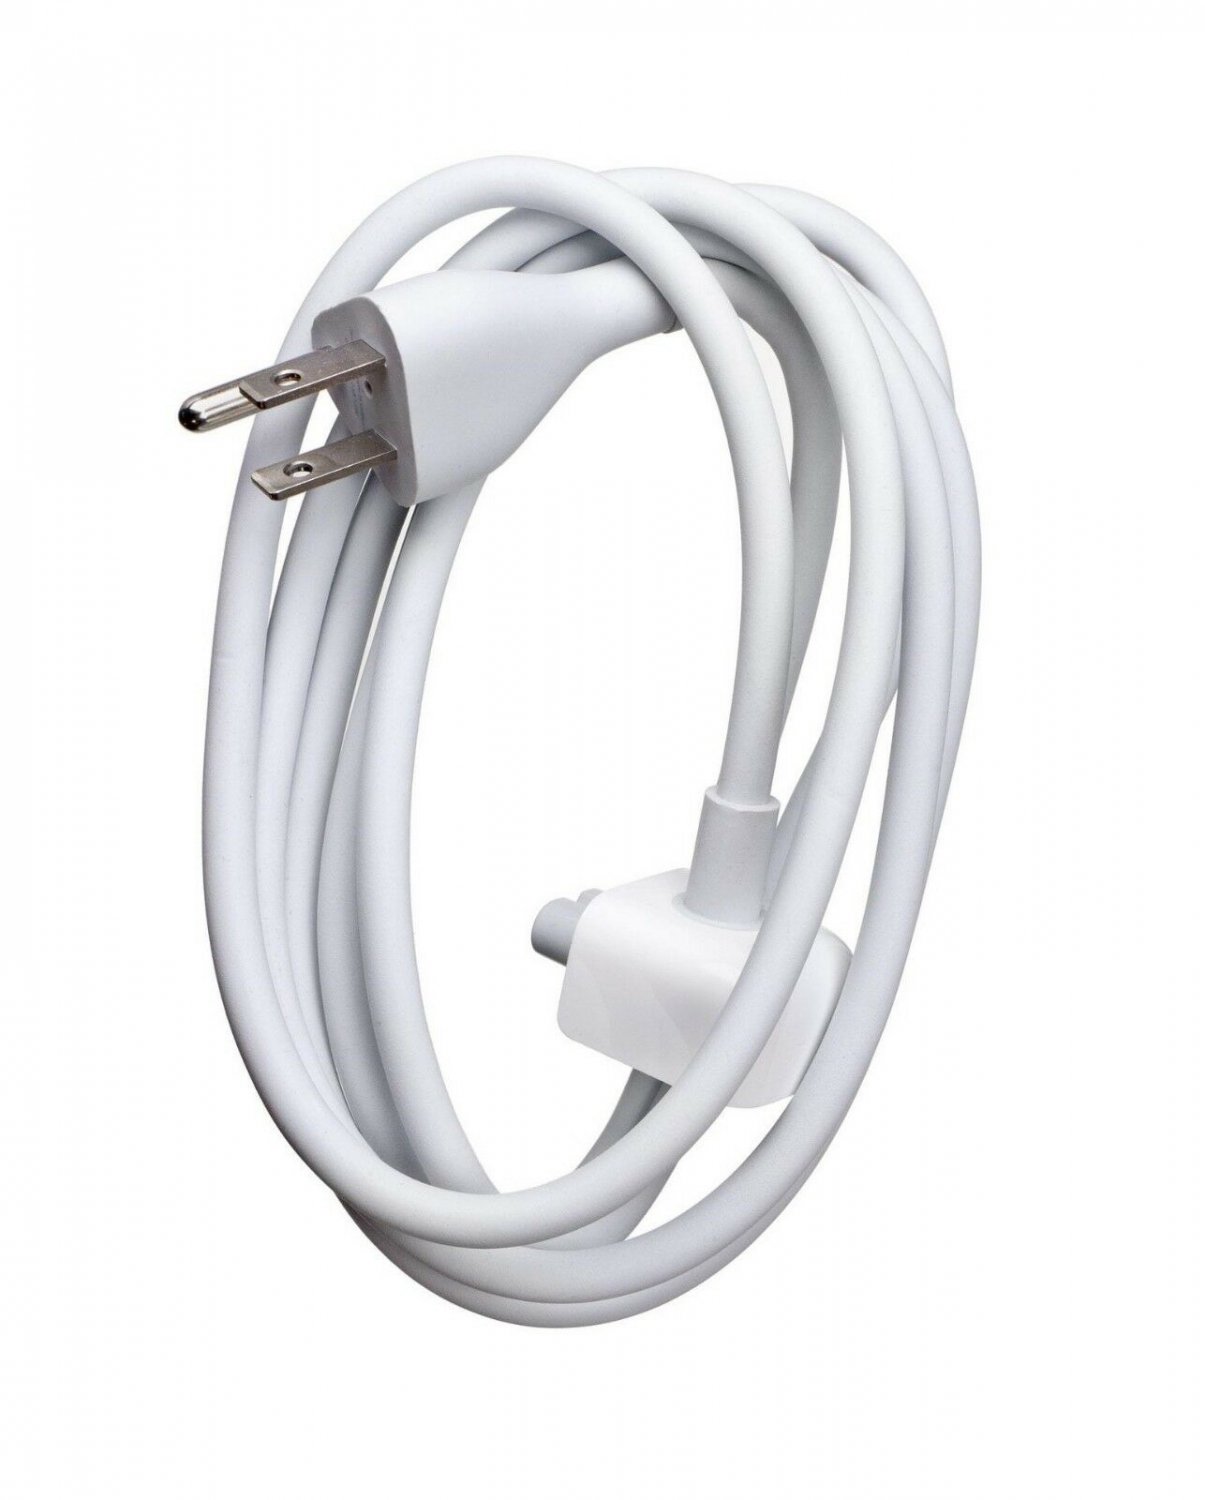 power cable for macbook air